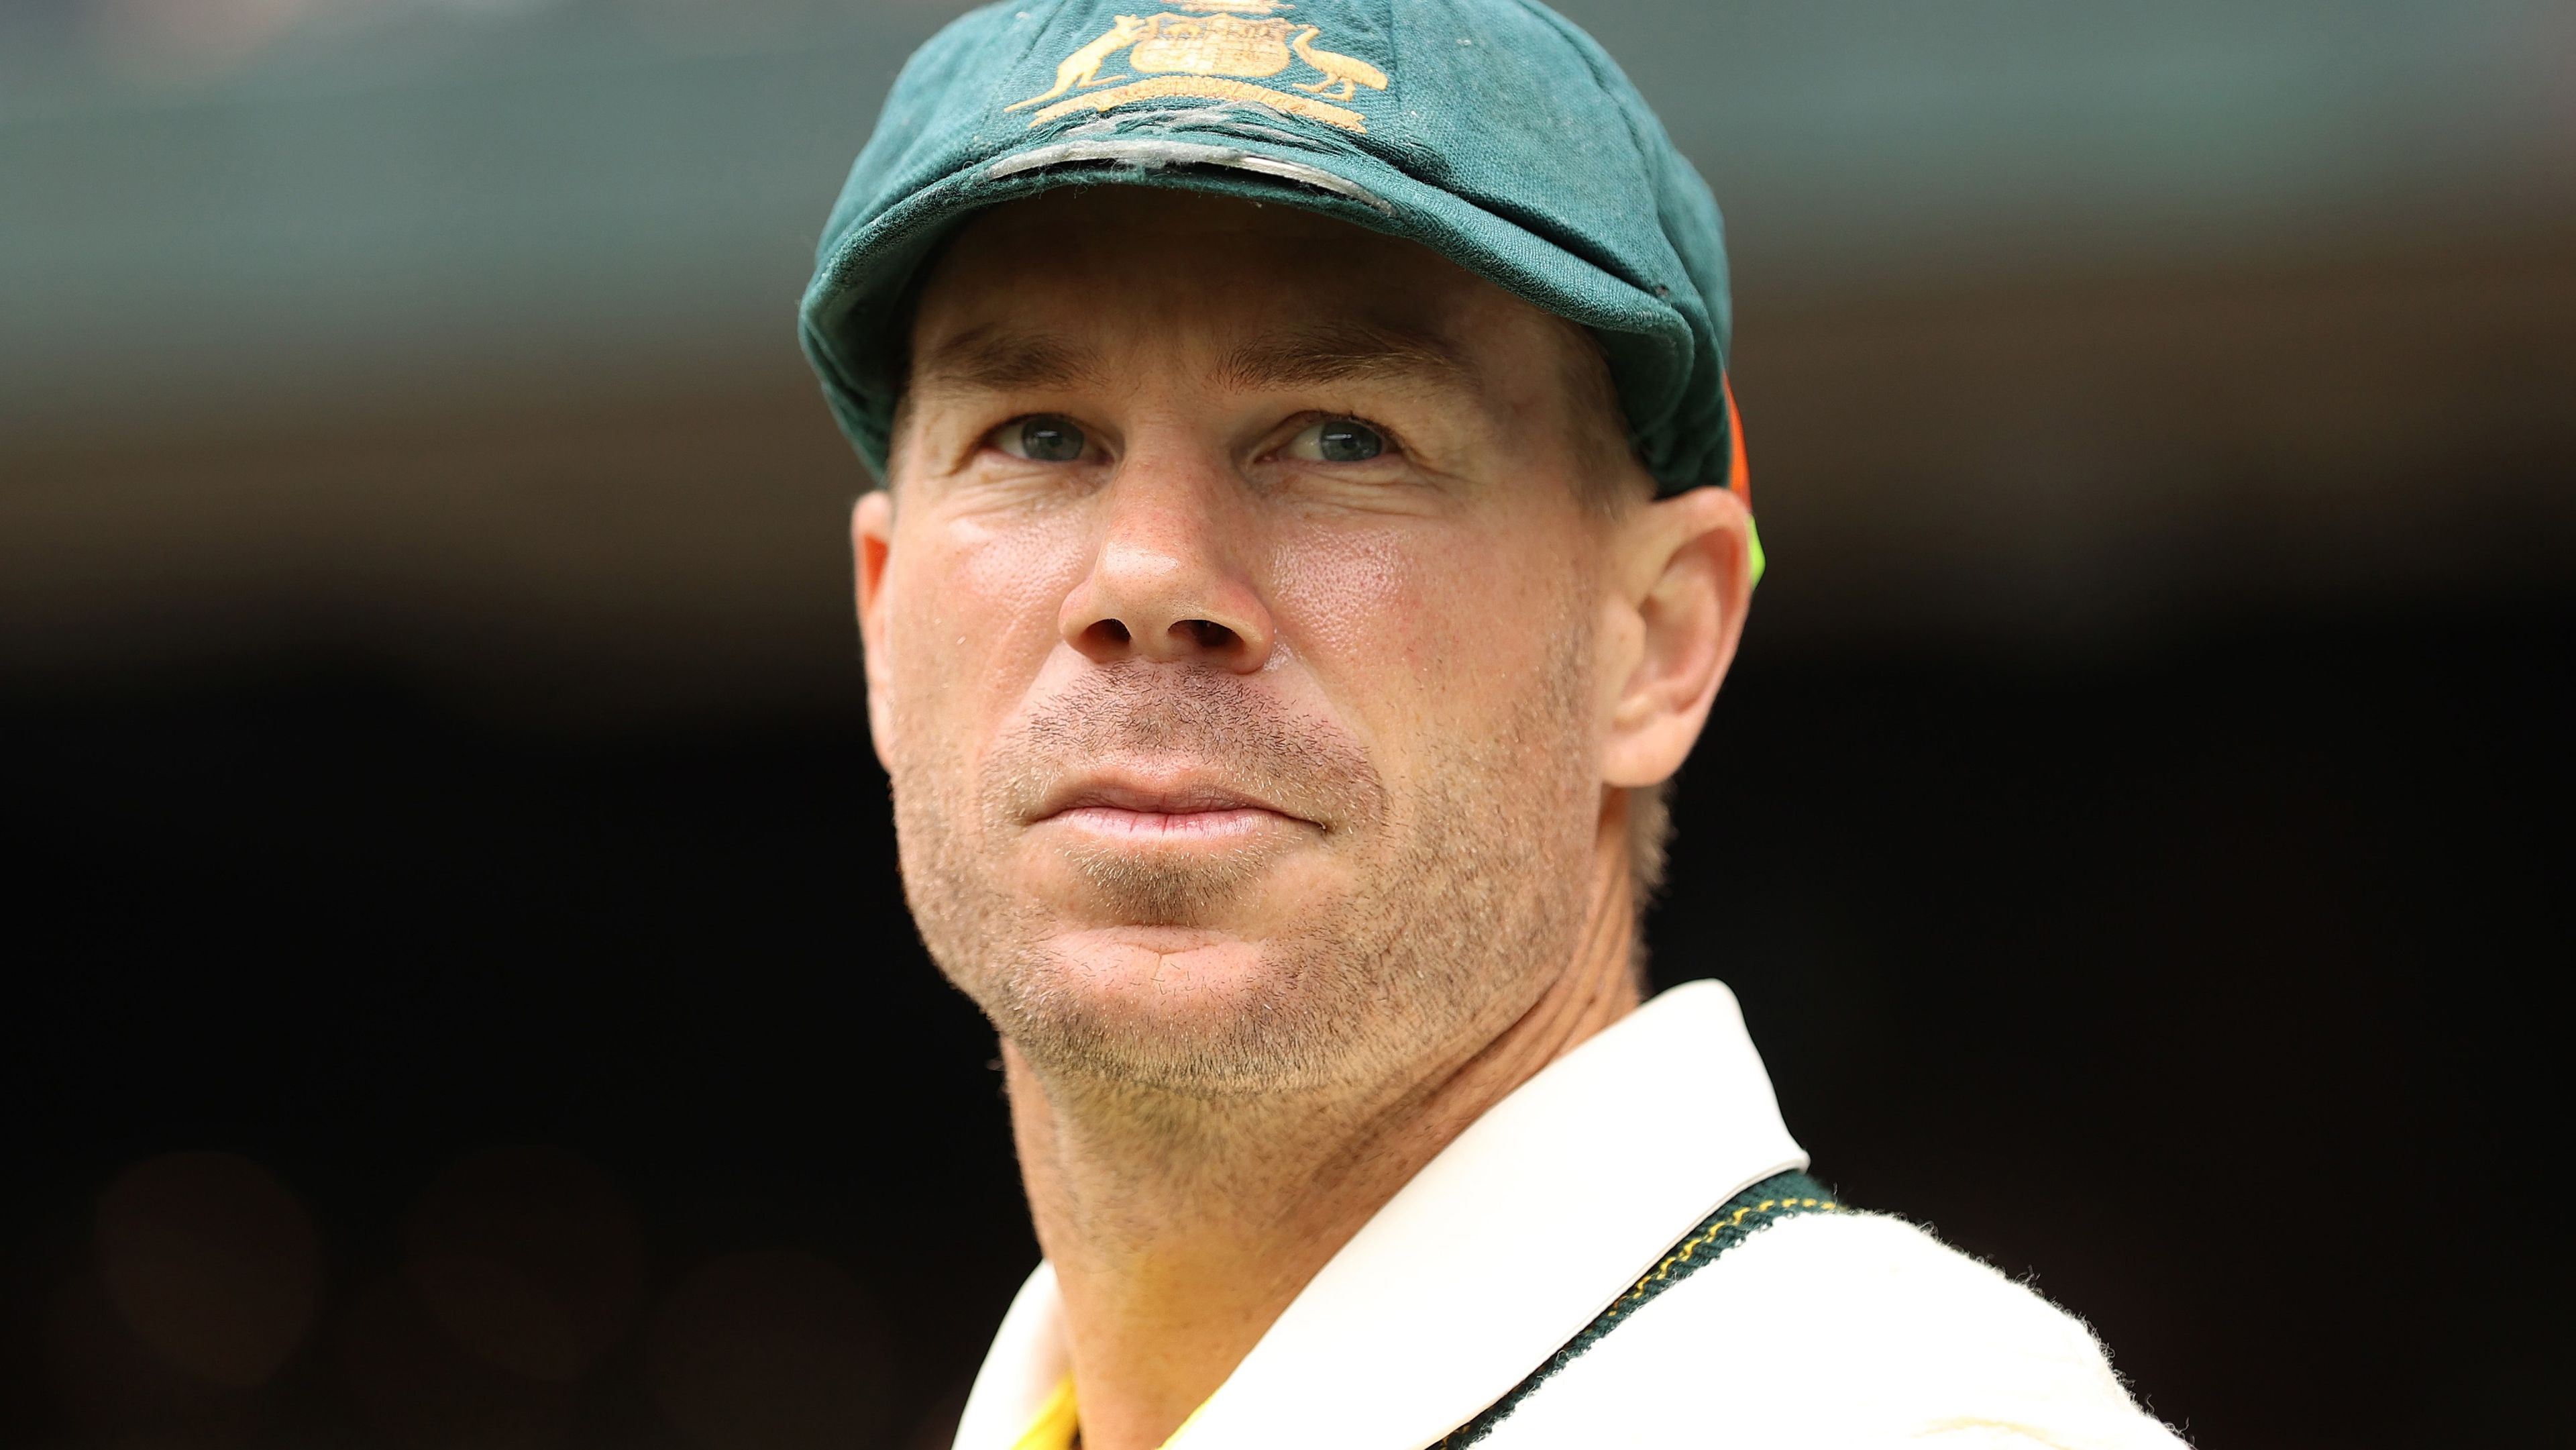 David Warner looks on before the national anthem prior to day one of the Third Test match in the Ashes series between Australia and England at Melbourne Cricket Ground